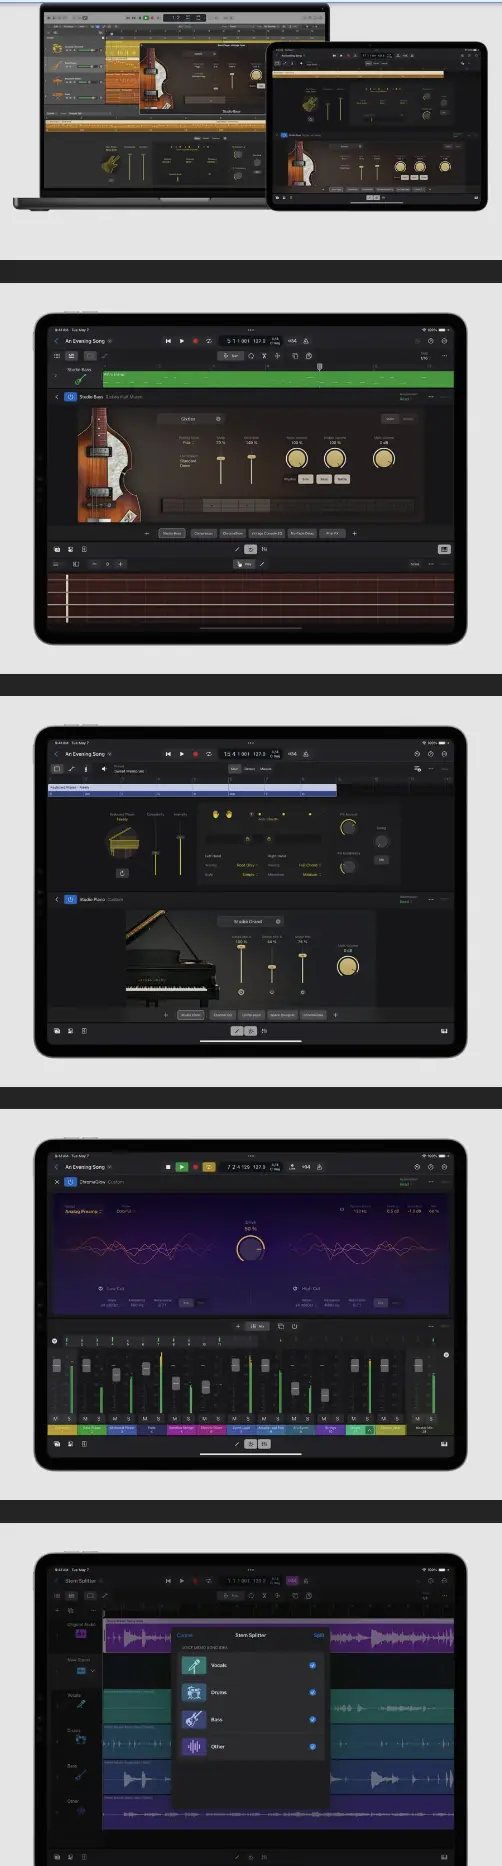 logic pro 2 new features